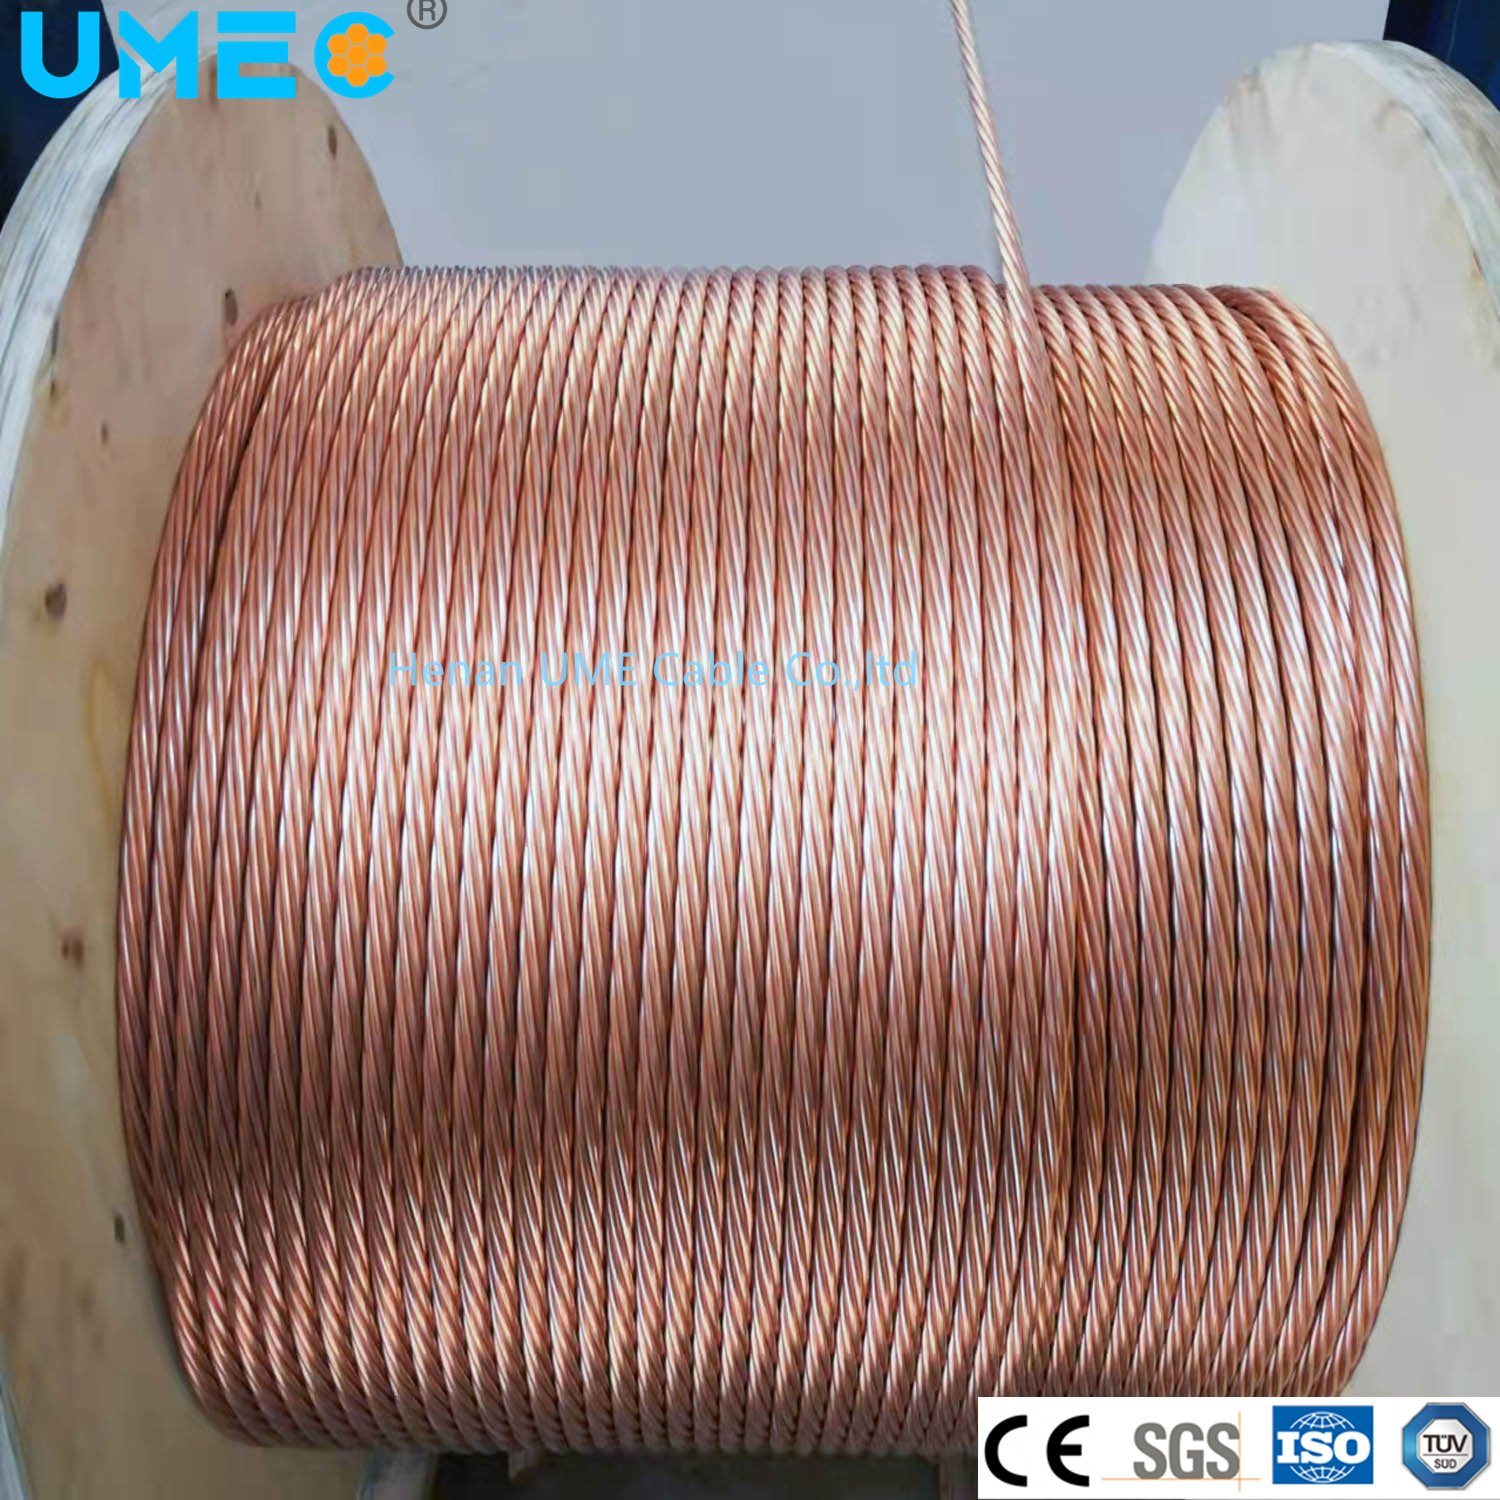 High Quality Copper Clad Steel Wire Cable Raw Material for Coaxial Cable Sheiding CCS